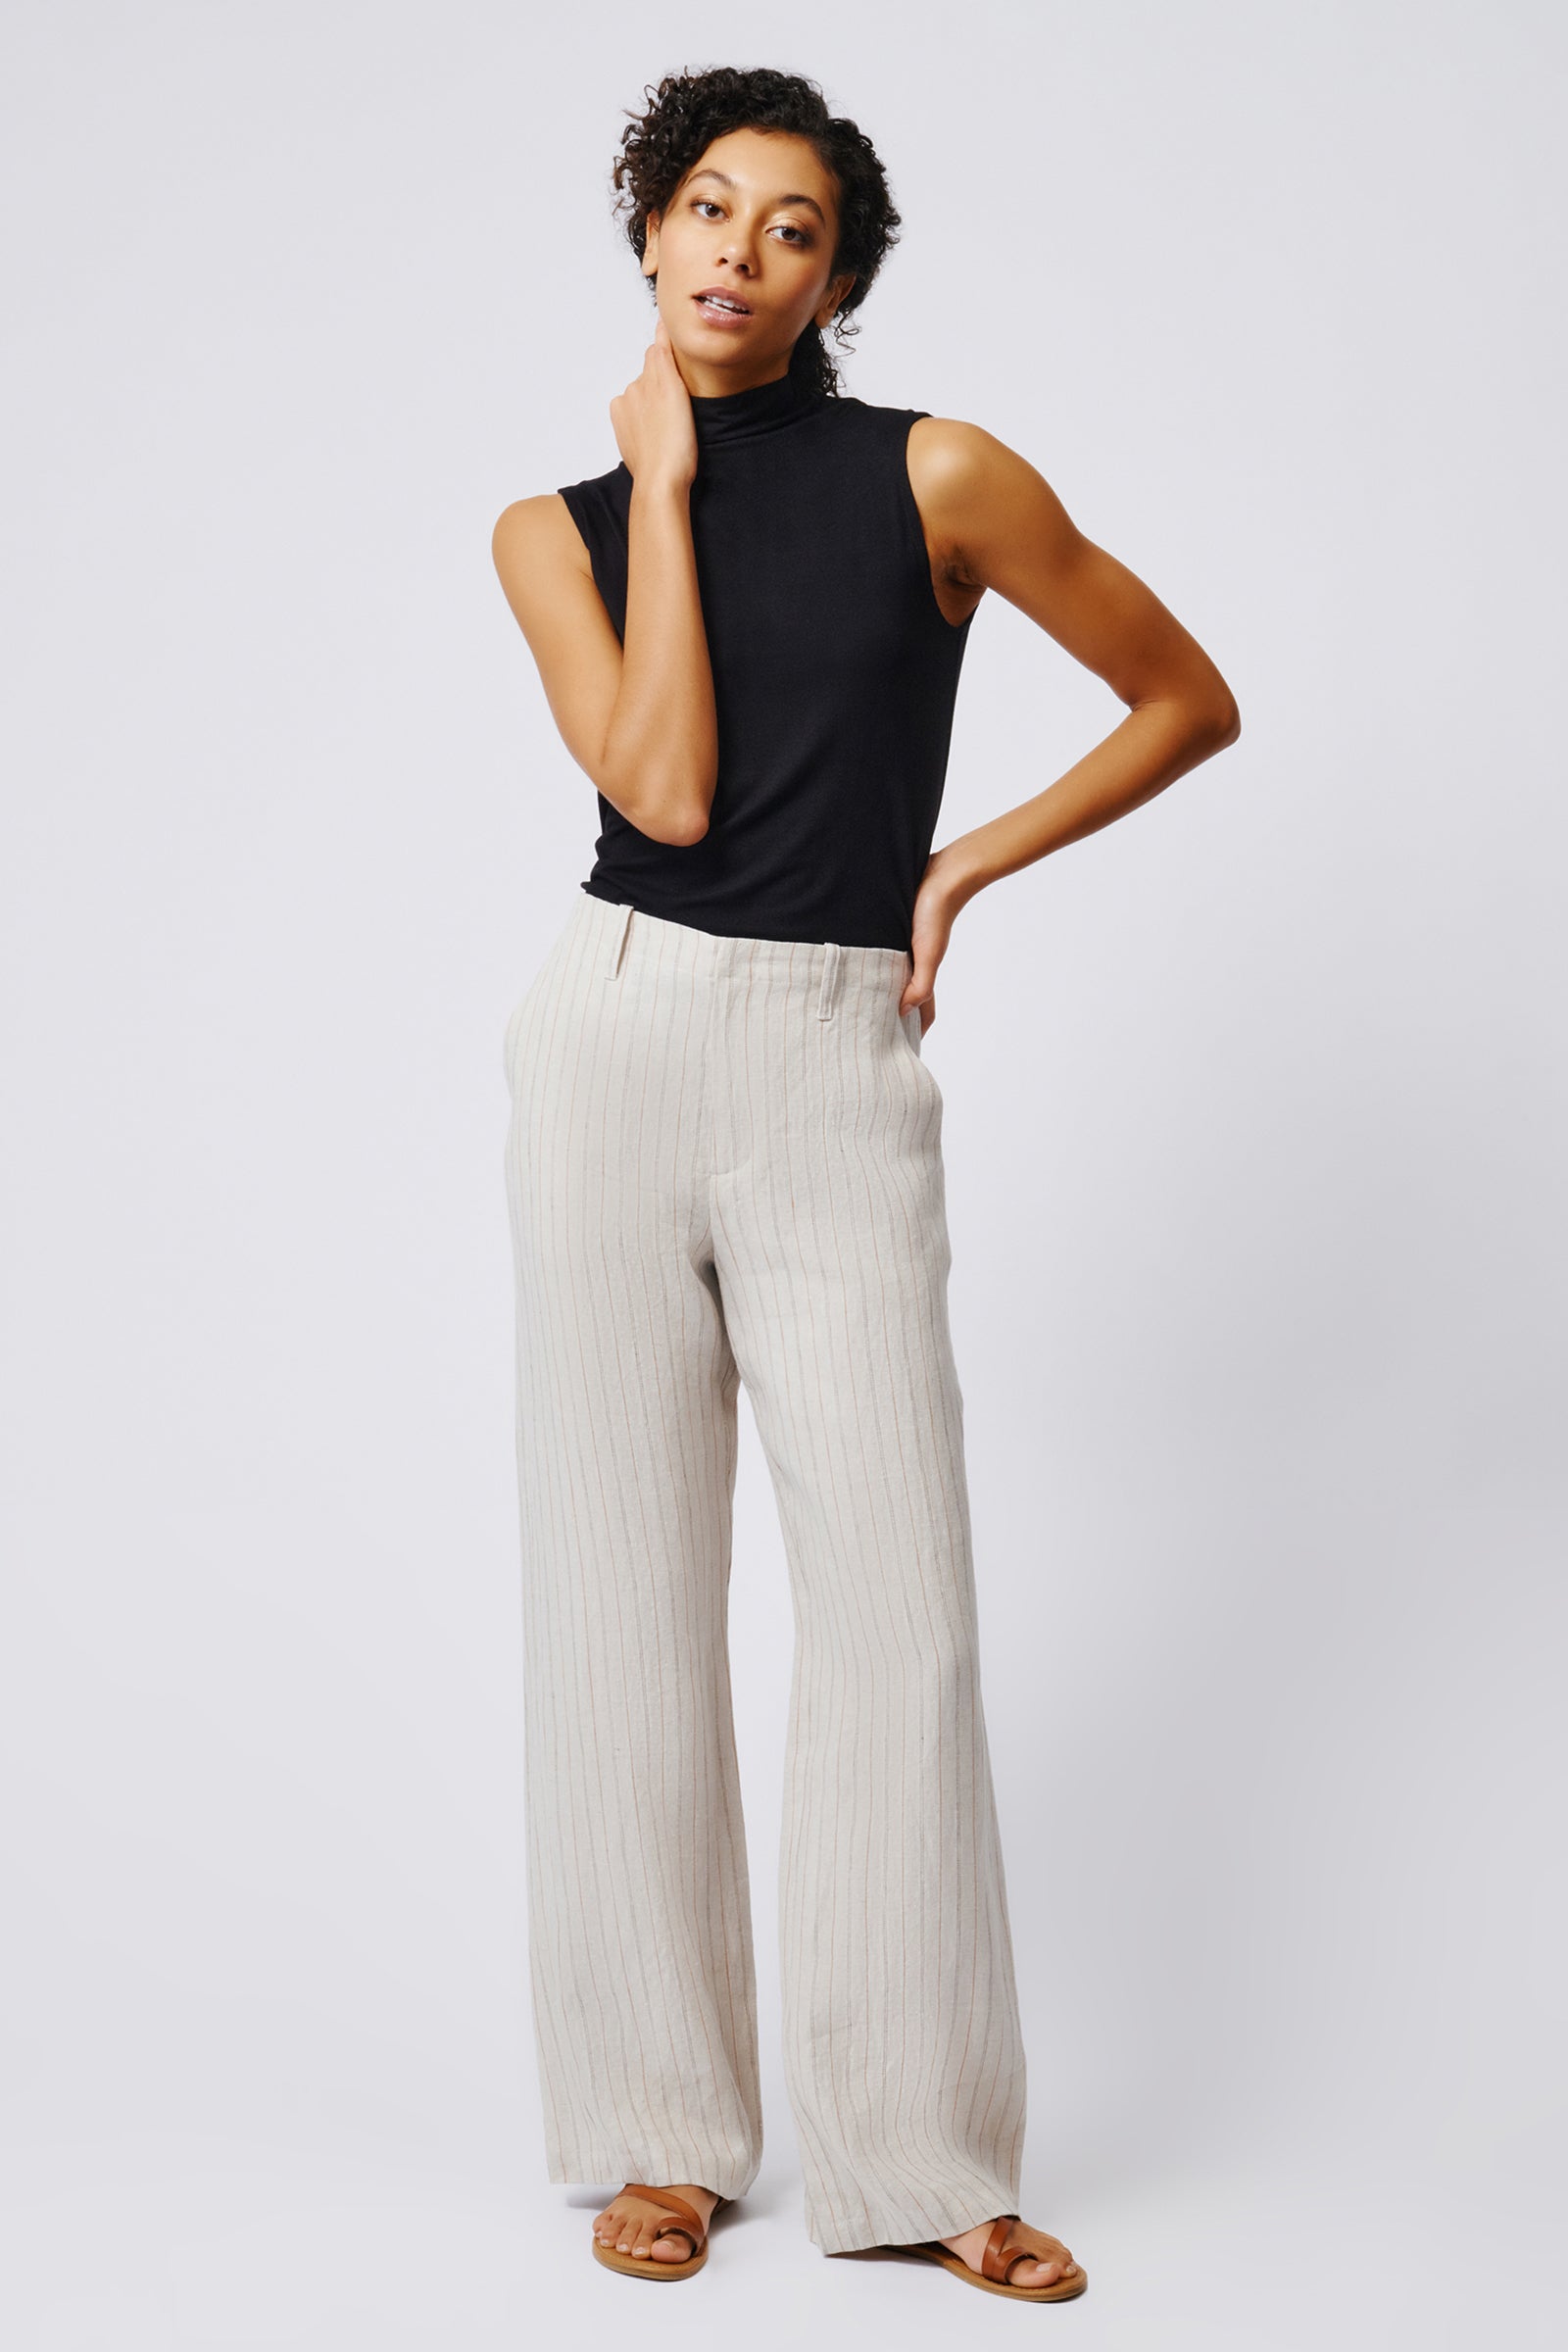 Floral Stovepipe Trousers by 3.1 Phillip Lim | Fashion, Fashion design,  Fashion outlet